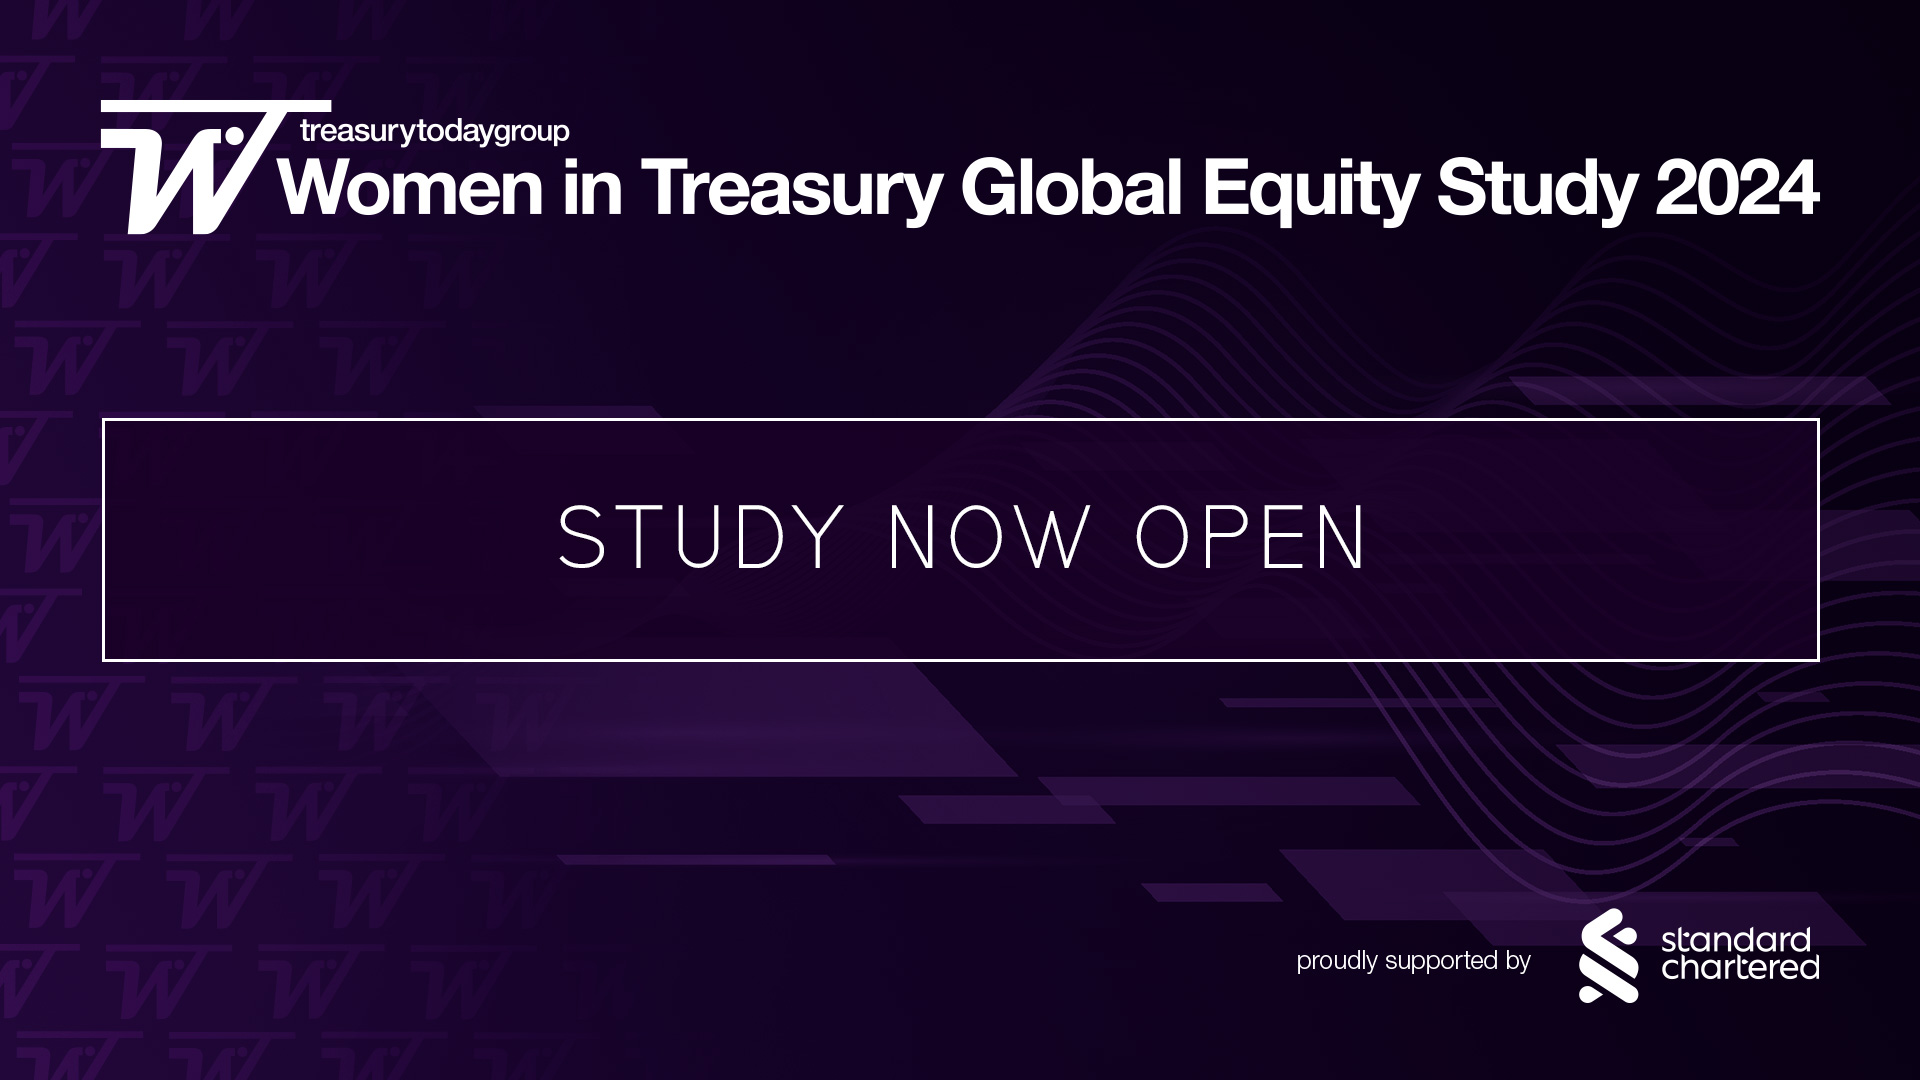 Women in Treasury Global Equity Study 2024 proudly supported by Standard Chartered